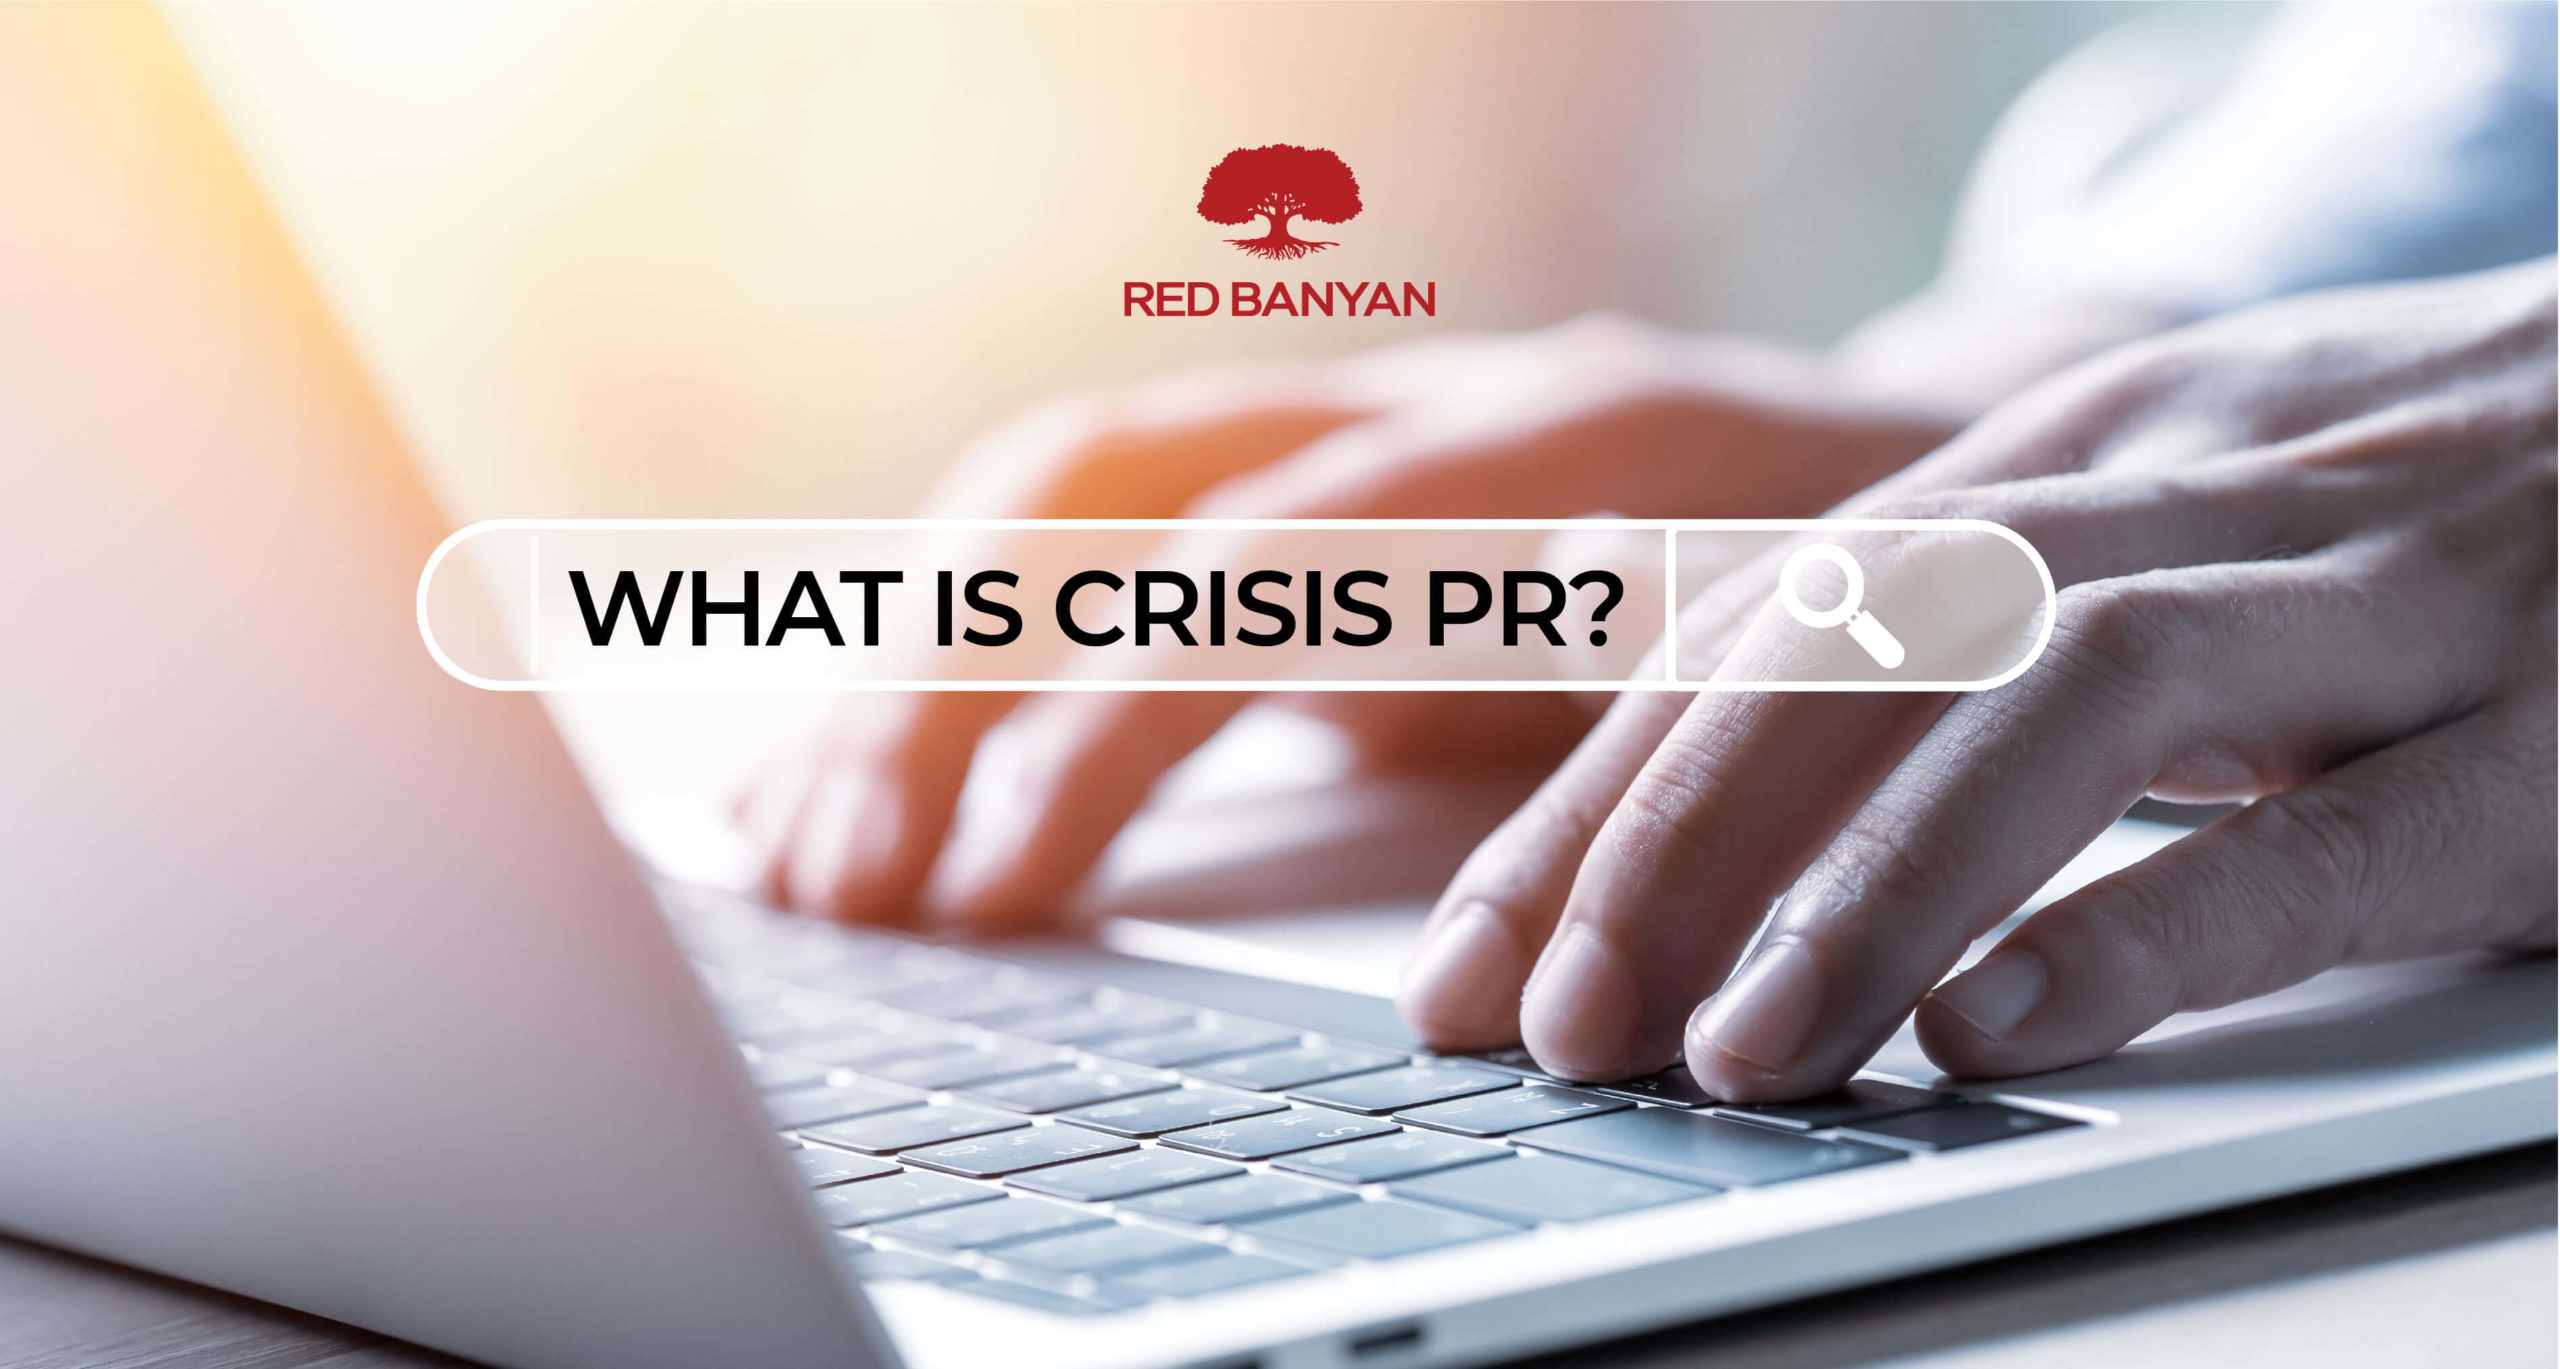 https://redbanyan.com/wp-content/uploads/2021/05/RB-BlogGraphic_what-is-crisis-pr-scaled.jpg